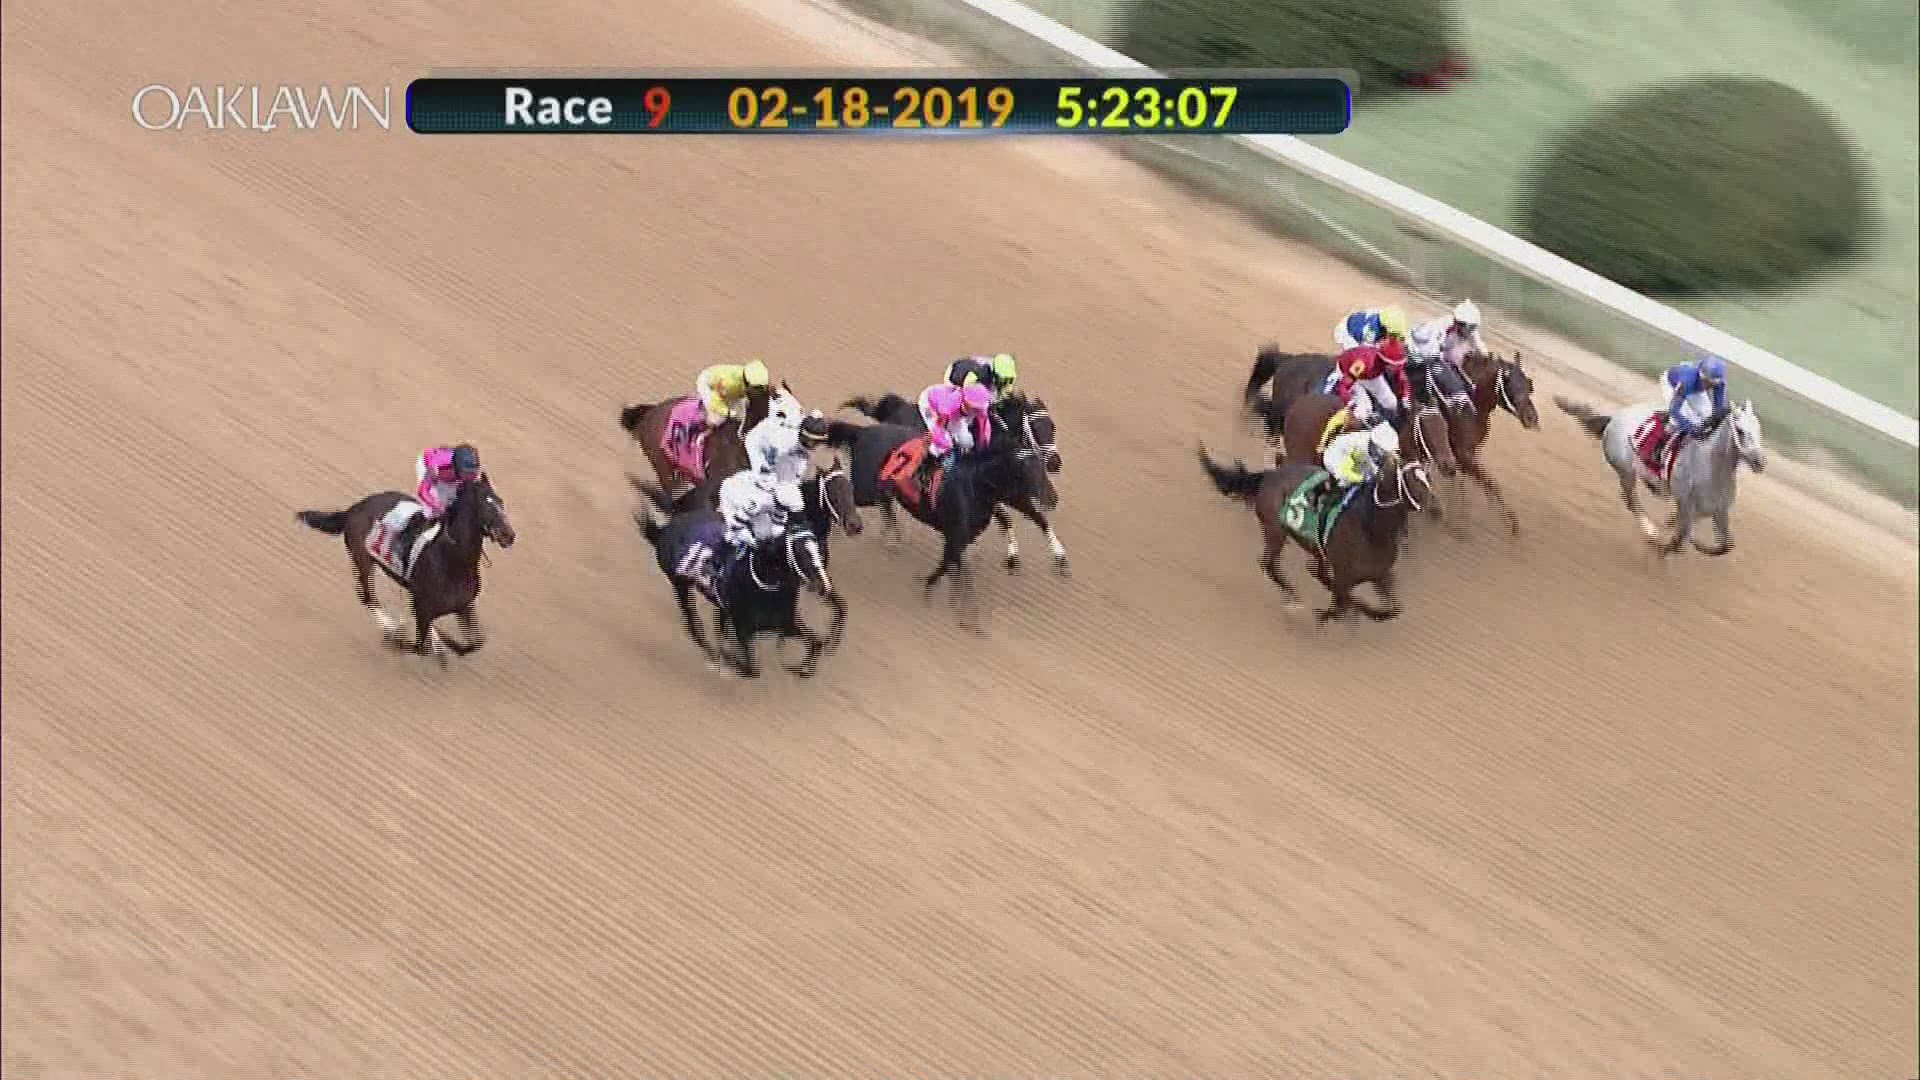 The son of 2010 Kentucky Derby winner, Super Saver, went off at 62-1 odds.